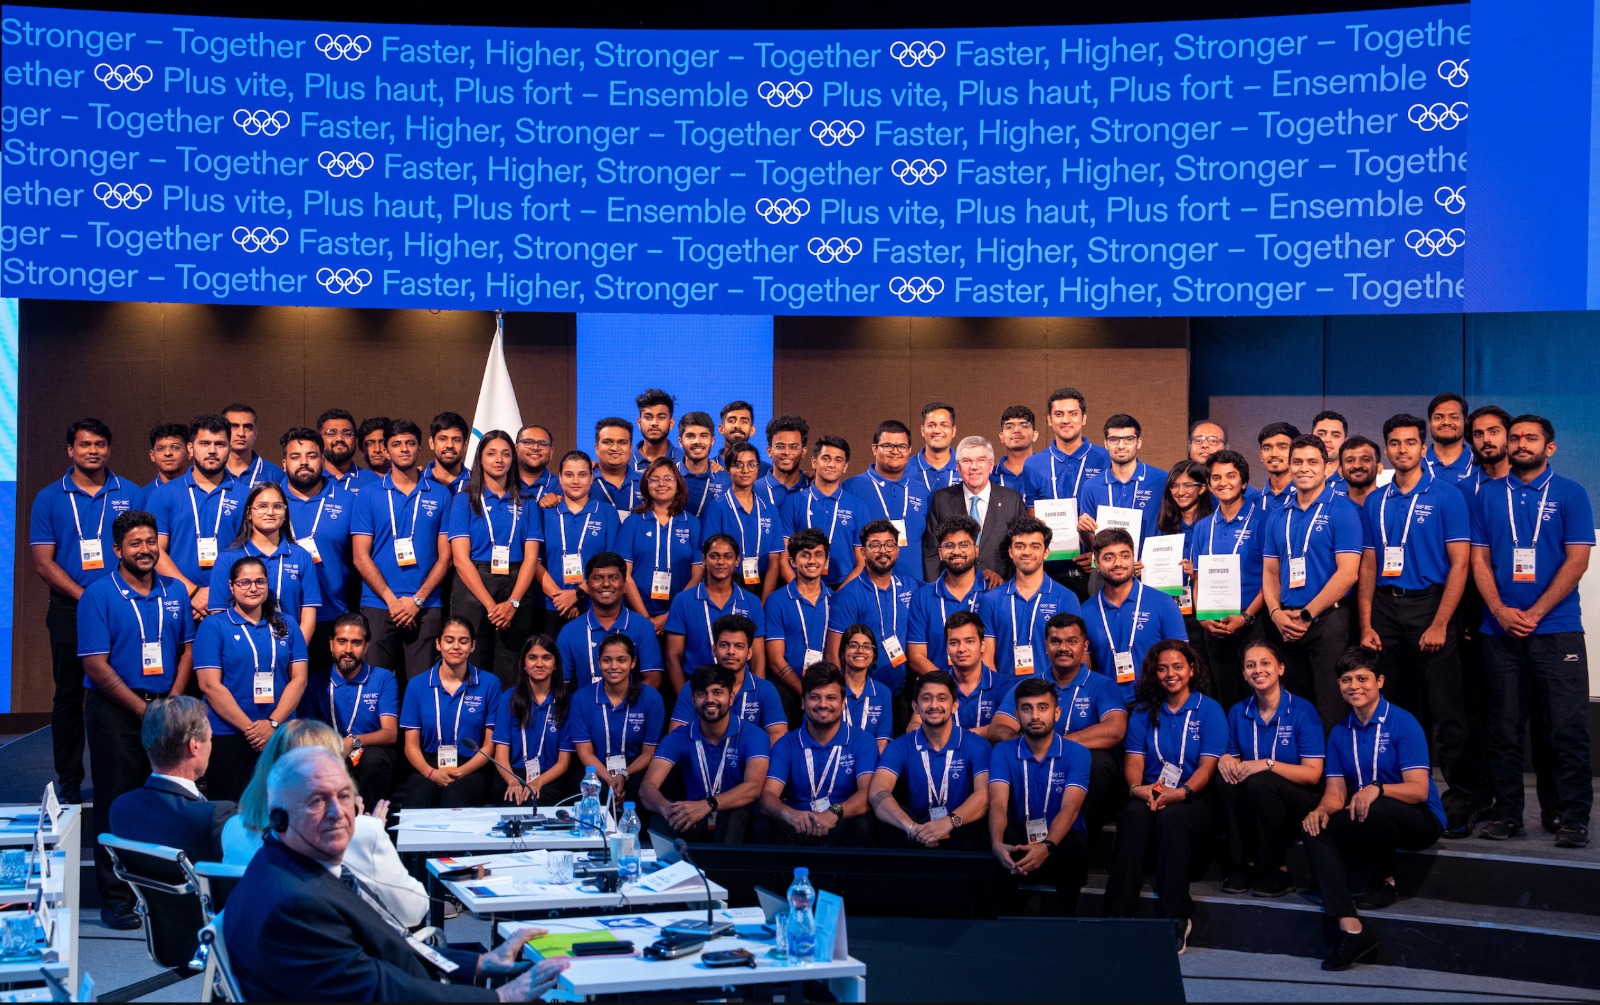 141st International Olympic Committee Session